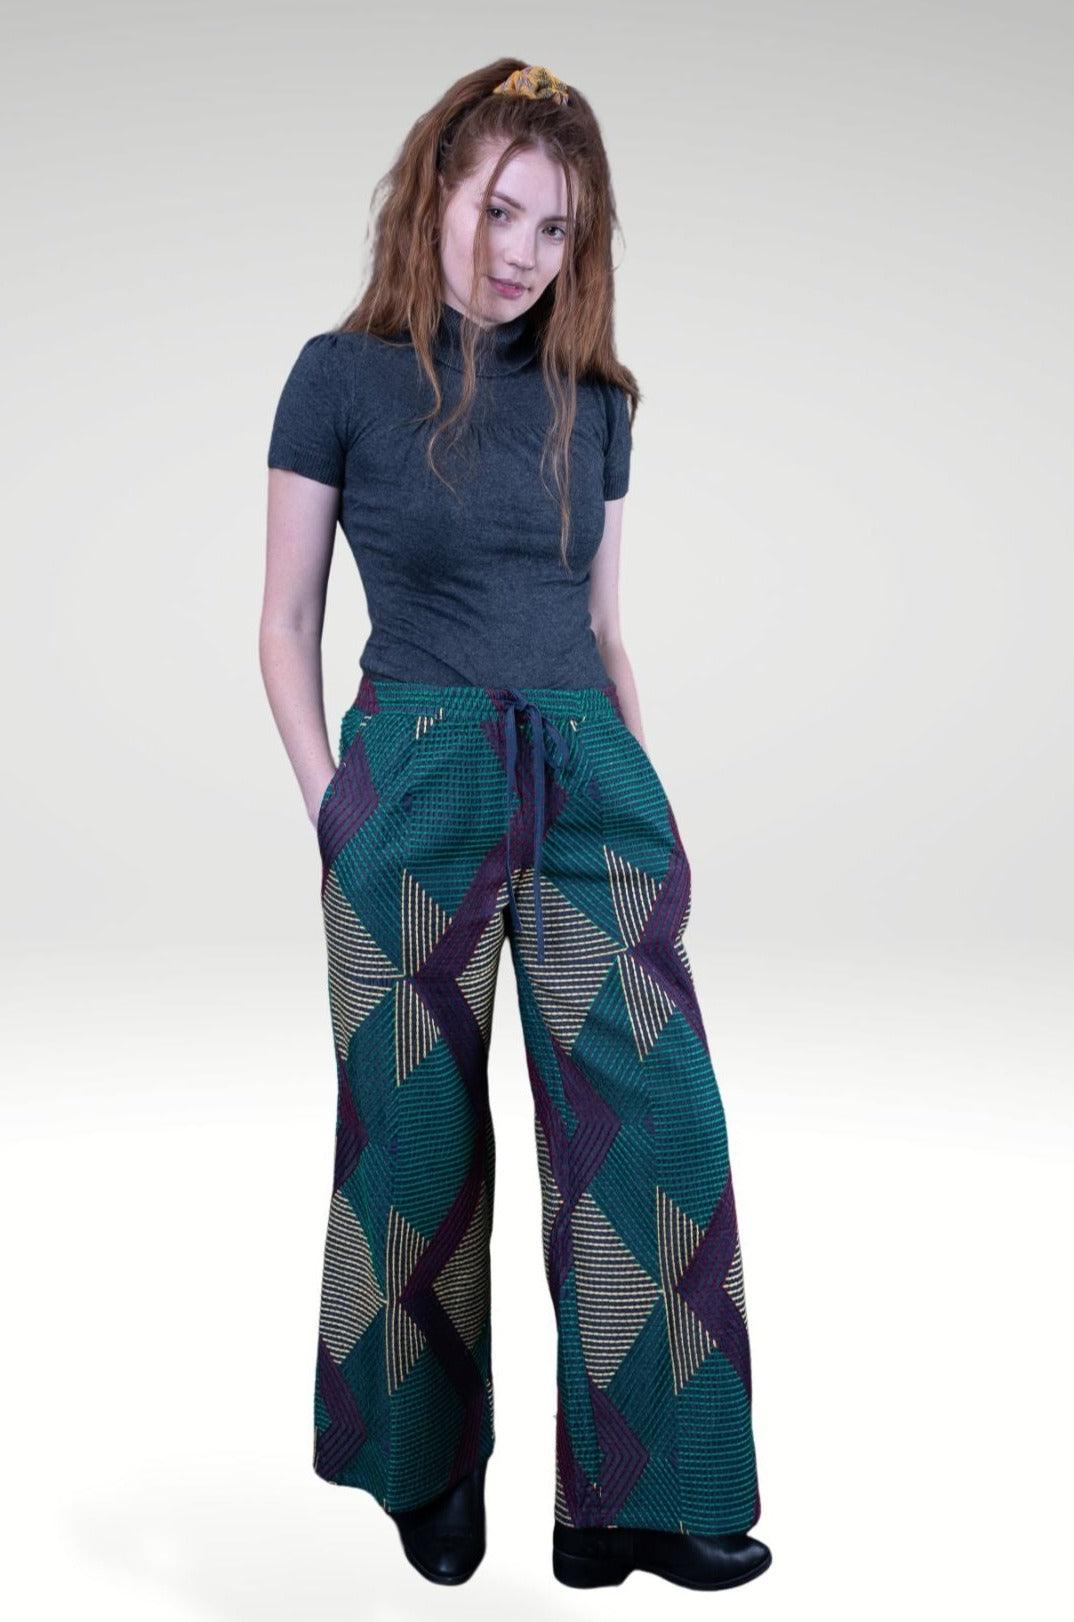 DONNATELLA EMBROIDERED WIDE-LEG PANTS - zohaonline- worn by the model with high neck knit top.